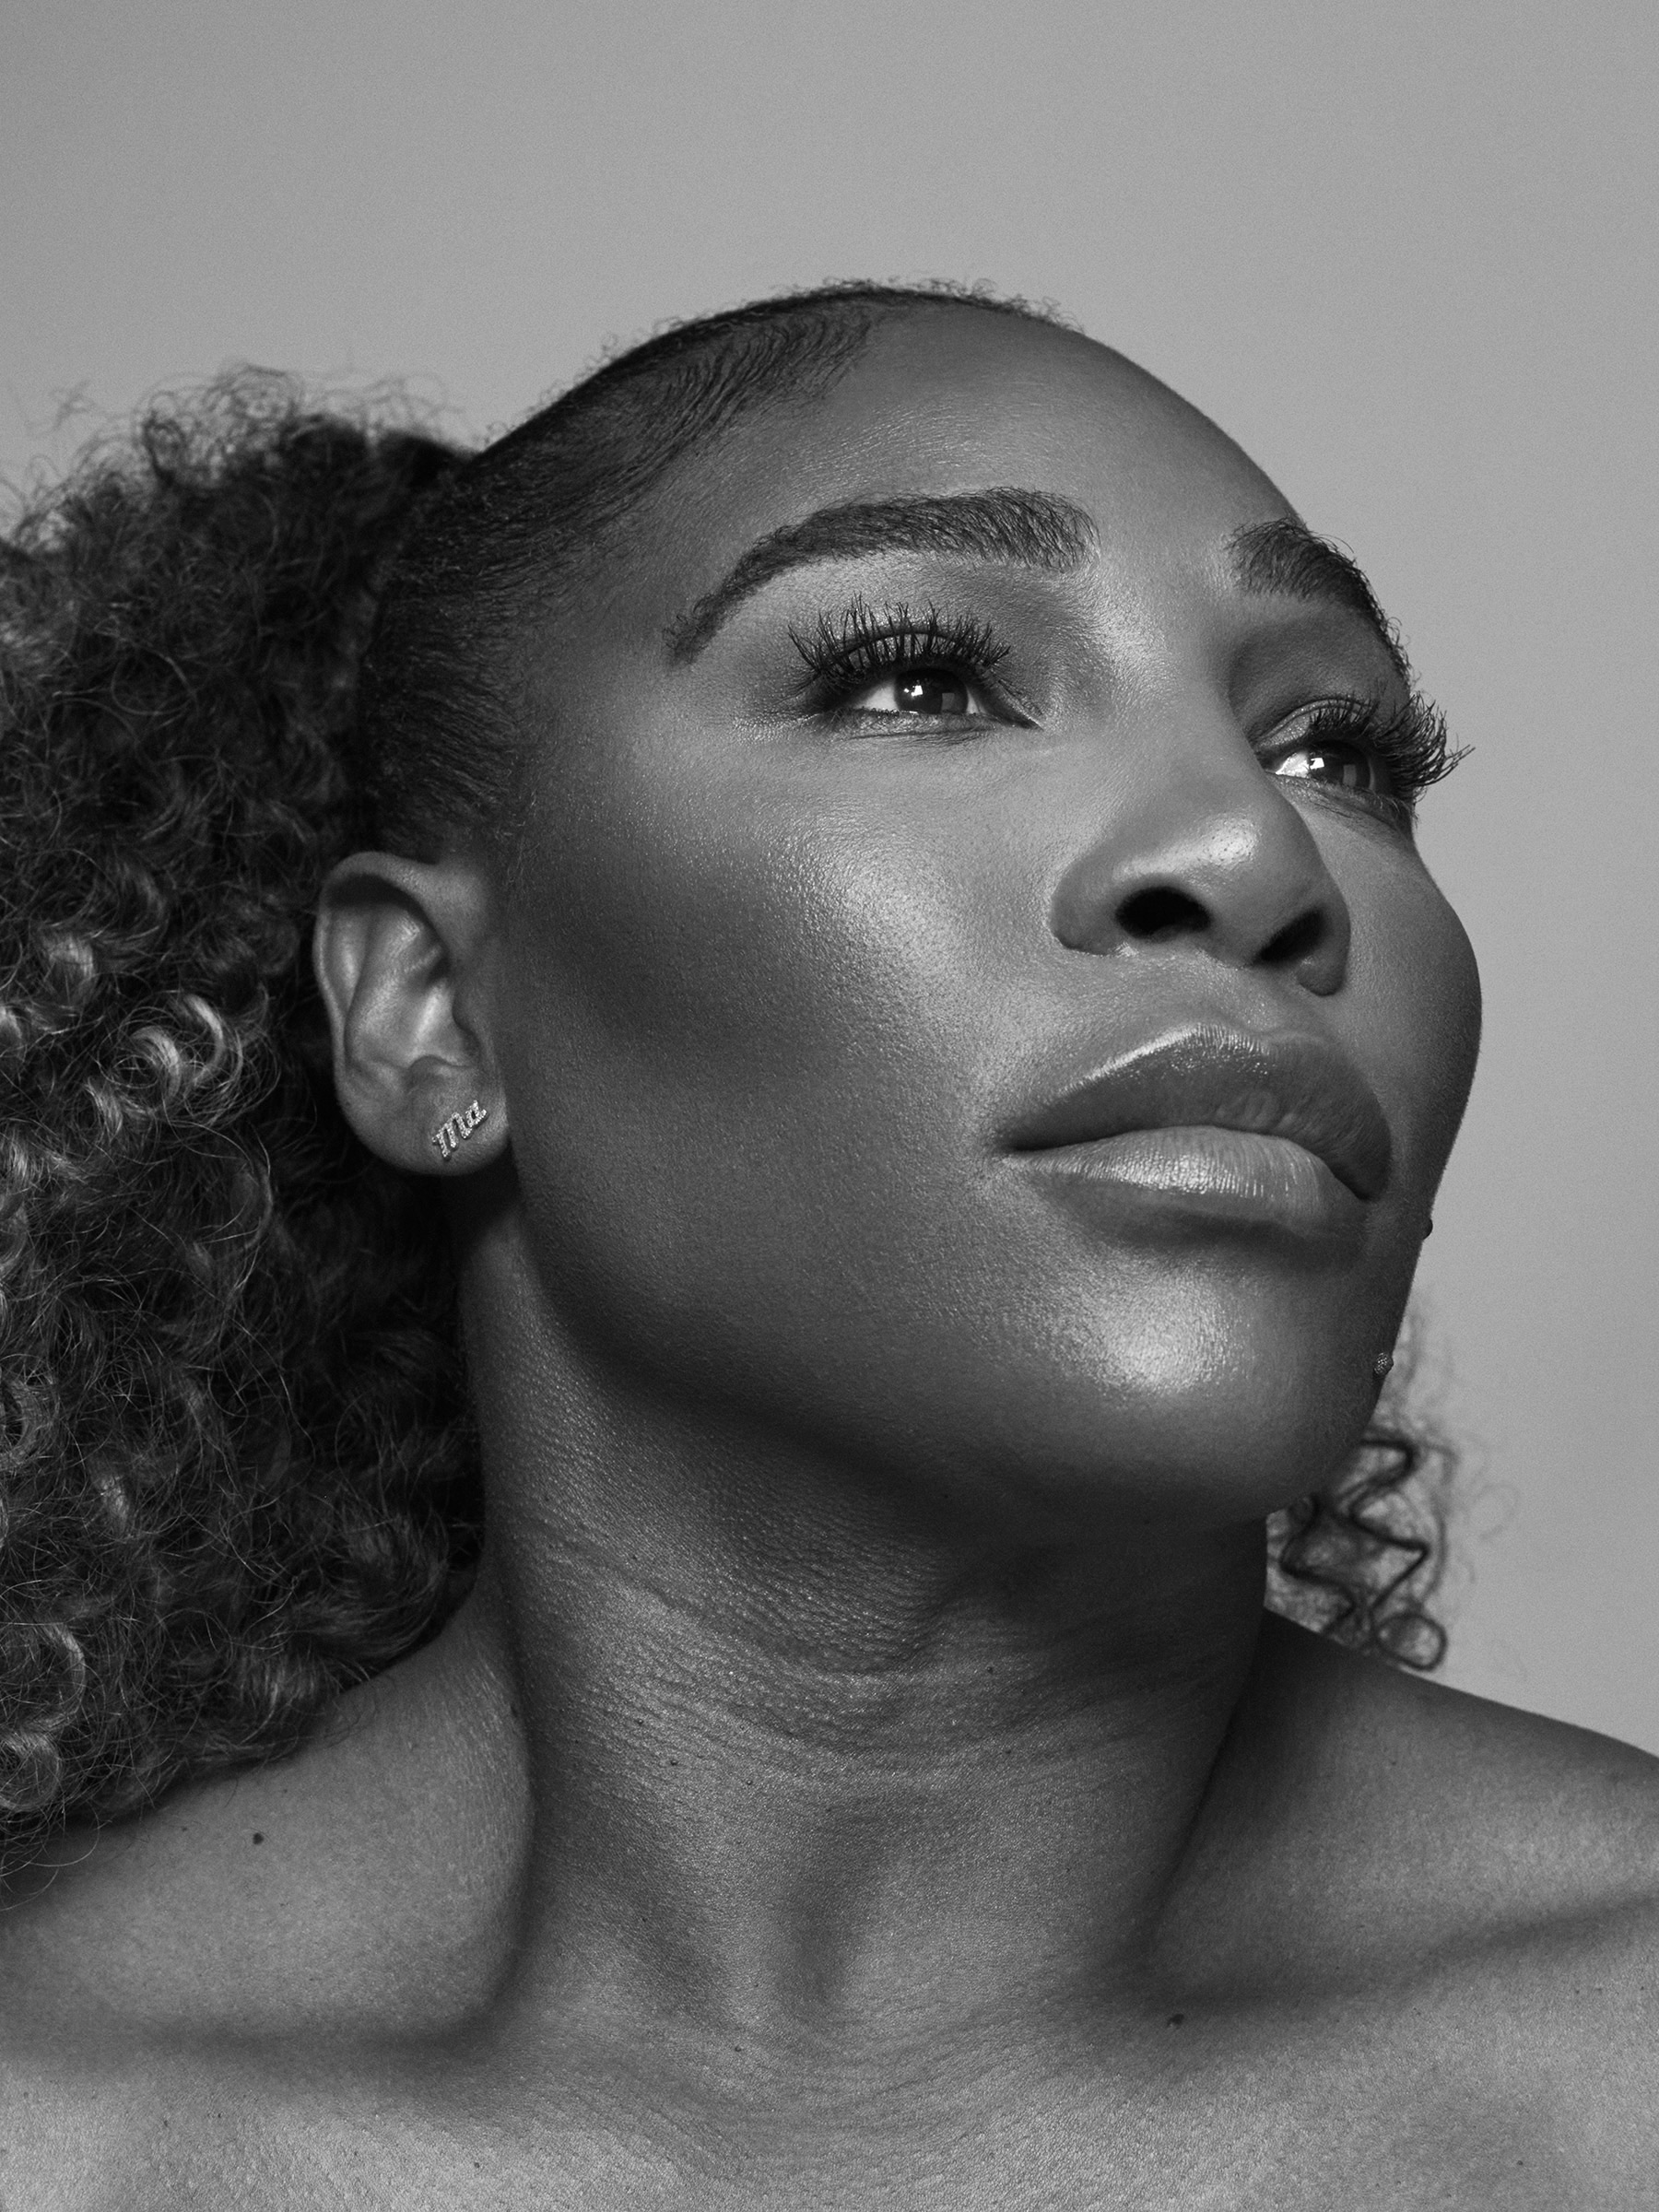 <strong>Serena Williams.</strong> "<a href="https://time.com/6208915/serena-williams-retirement-interview/">What Serena Williams Gave the World,</a>" September 12 issue. (Paola Kudacki for TIME)